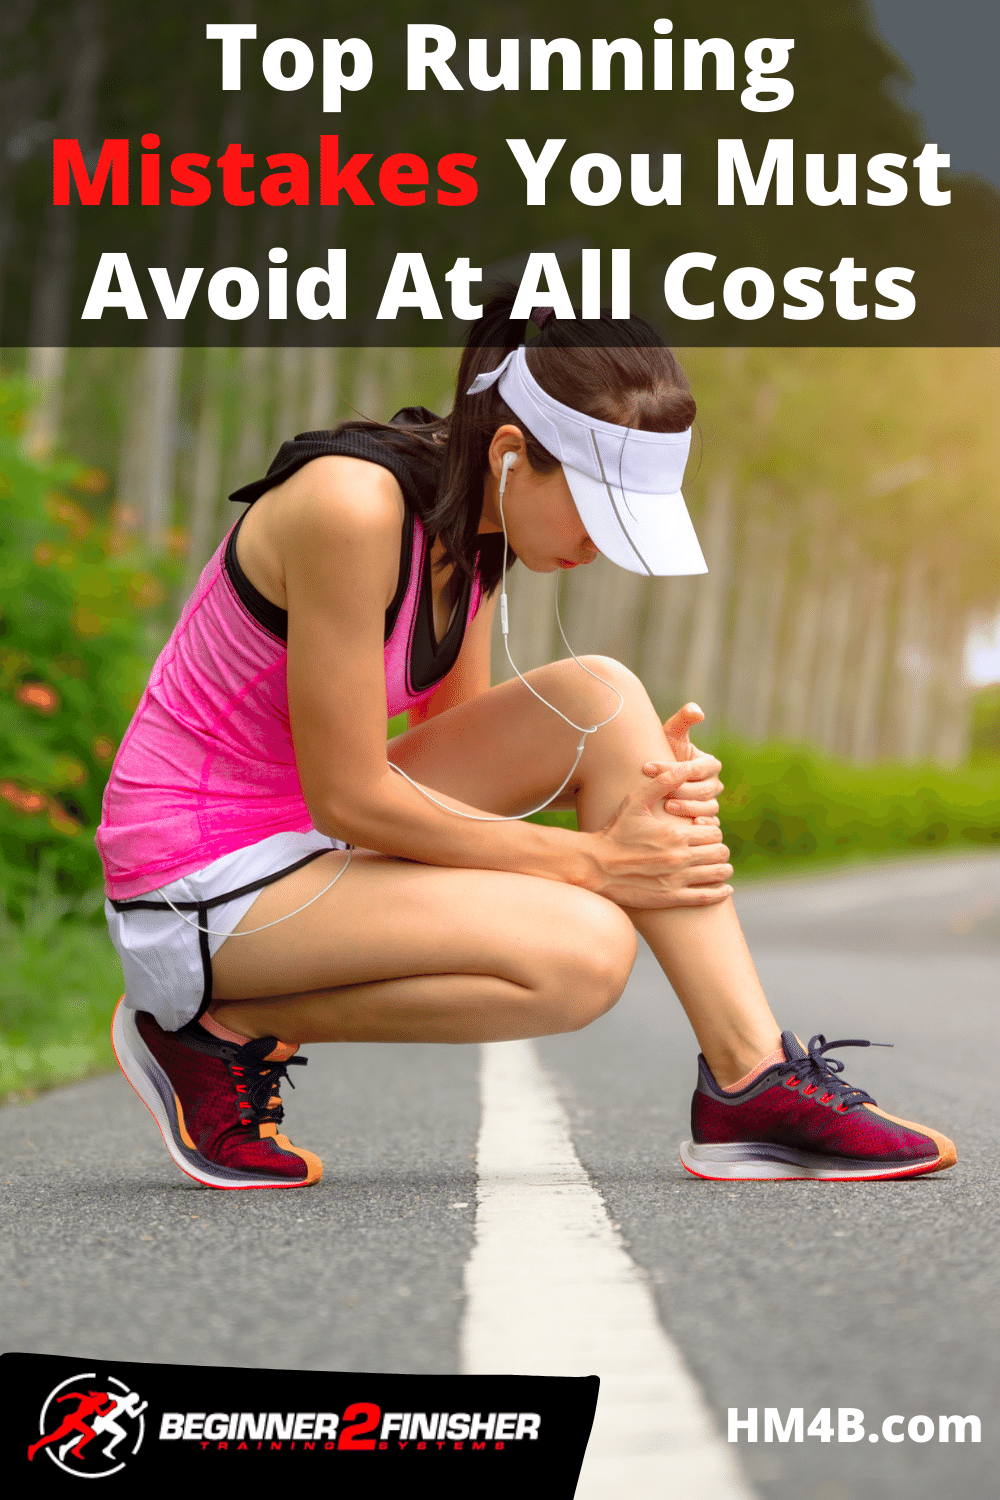 Top Running Mistakes You Must Avoid At All Costs